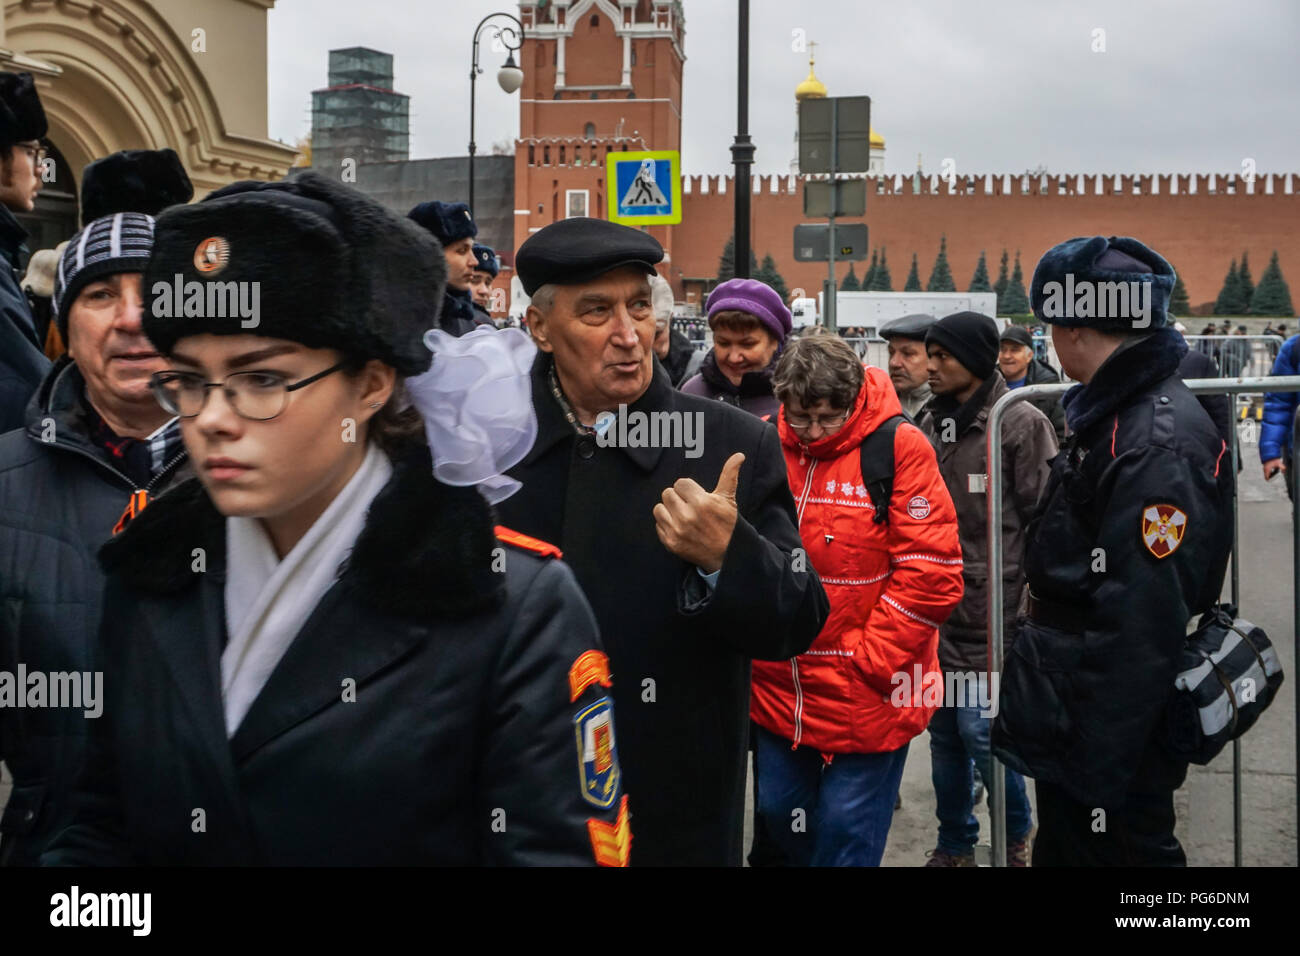 Moscow, Russia. 7th November, 2017. The centenary of October Revolution was celebrated on the Red Square by Russian army with a parade. Some people attended the celebrations with military uniforms. Stock Photo